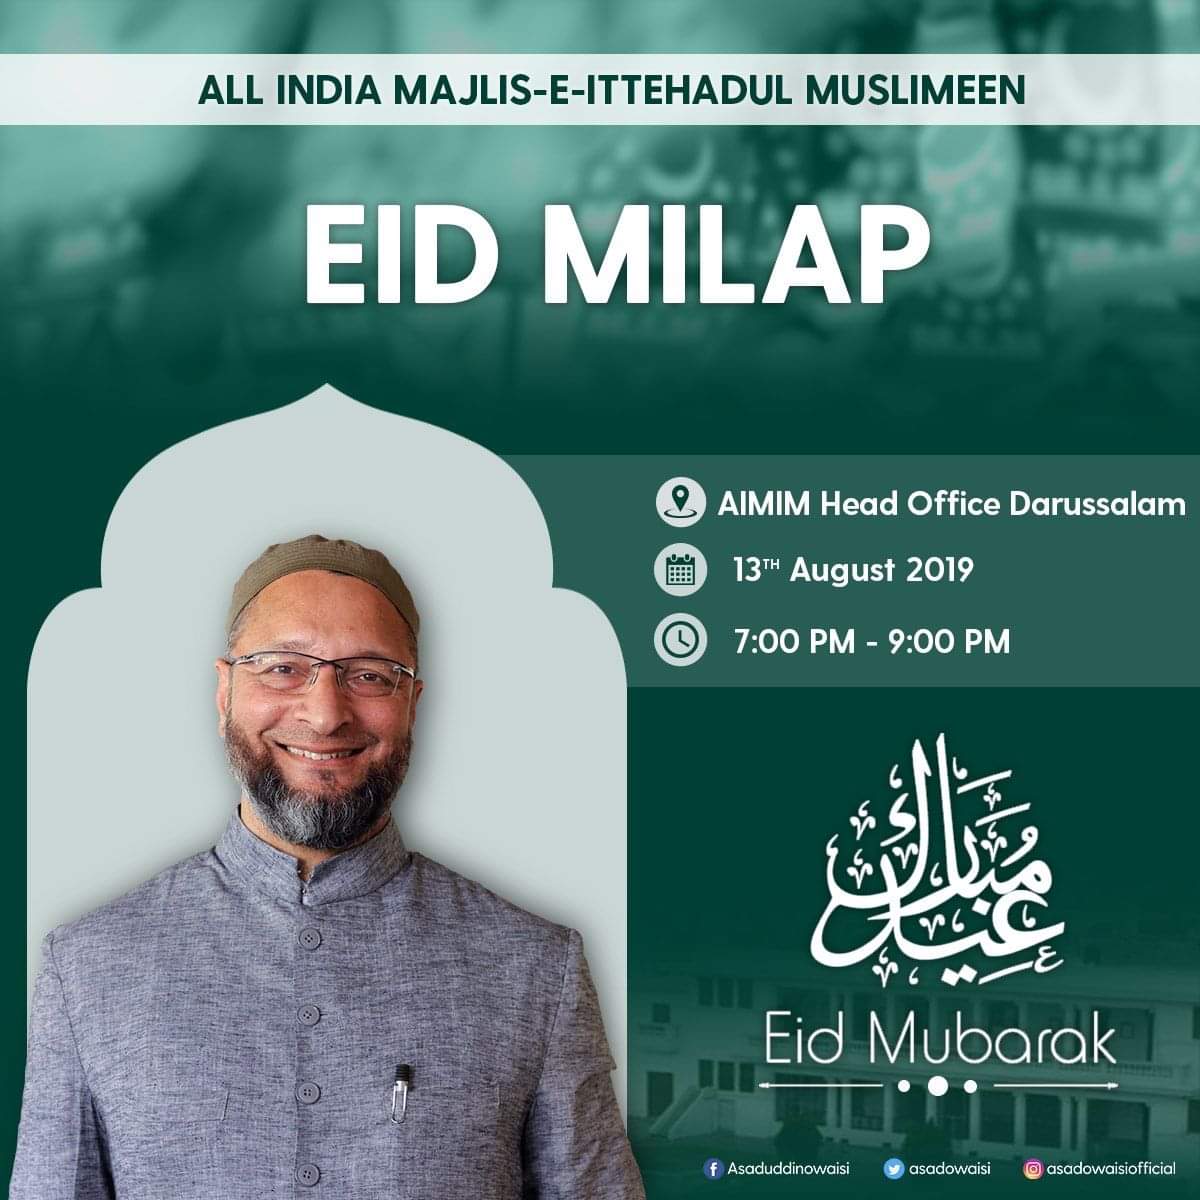 Eid Milap at #AIMIM Party Headquarters Darussalam Hyderabad

13 August 2019 #Timing : 7pm to 9pm
All are Invited